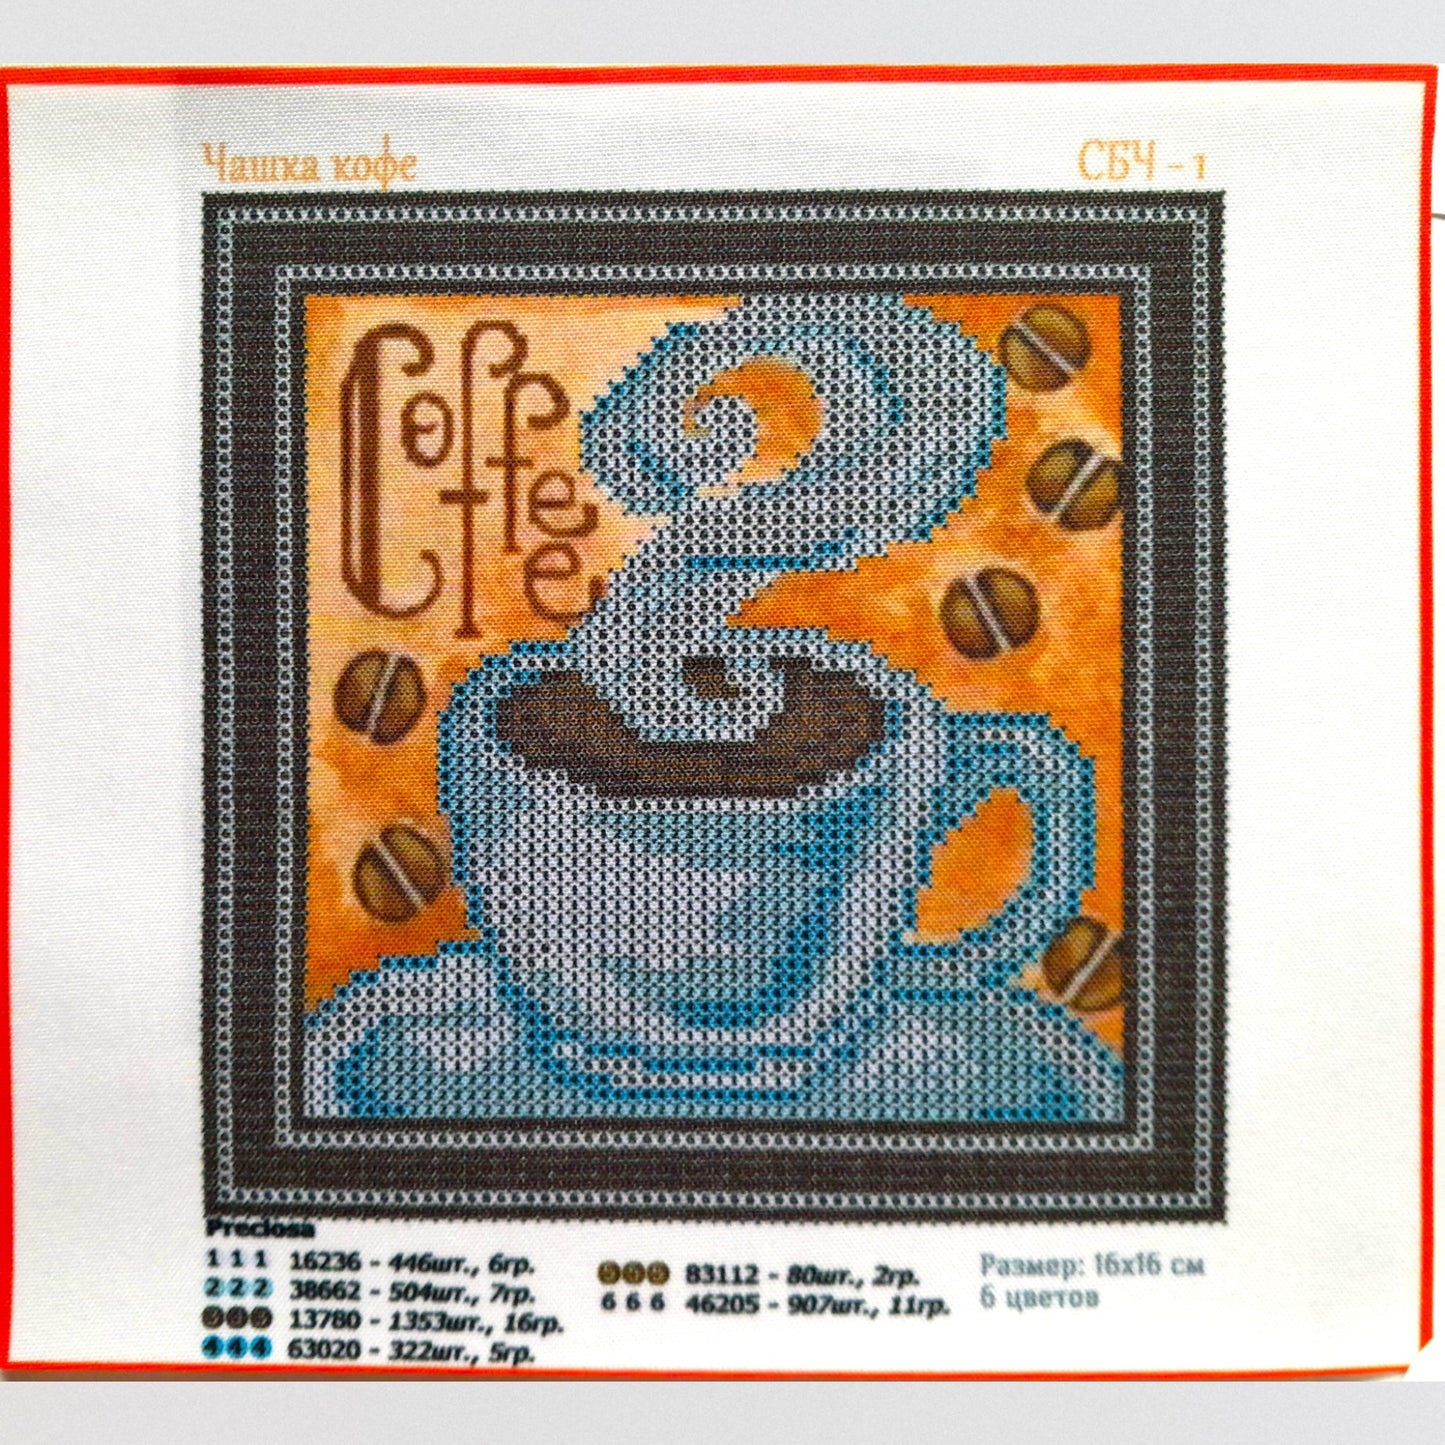 DIY Bead embroidery kit "Cup of coffee". Size: 6.3 - 6.3in (16 - 16cm). - VadymShop